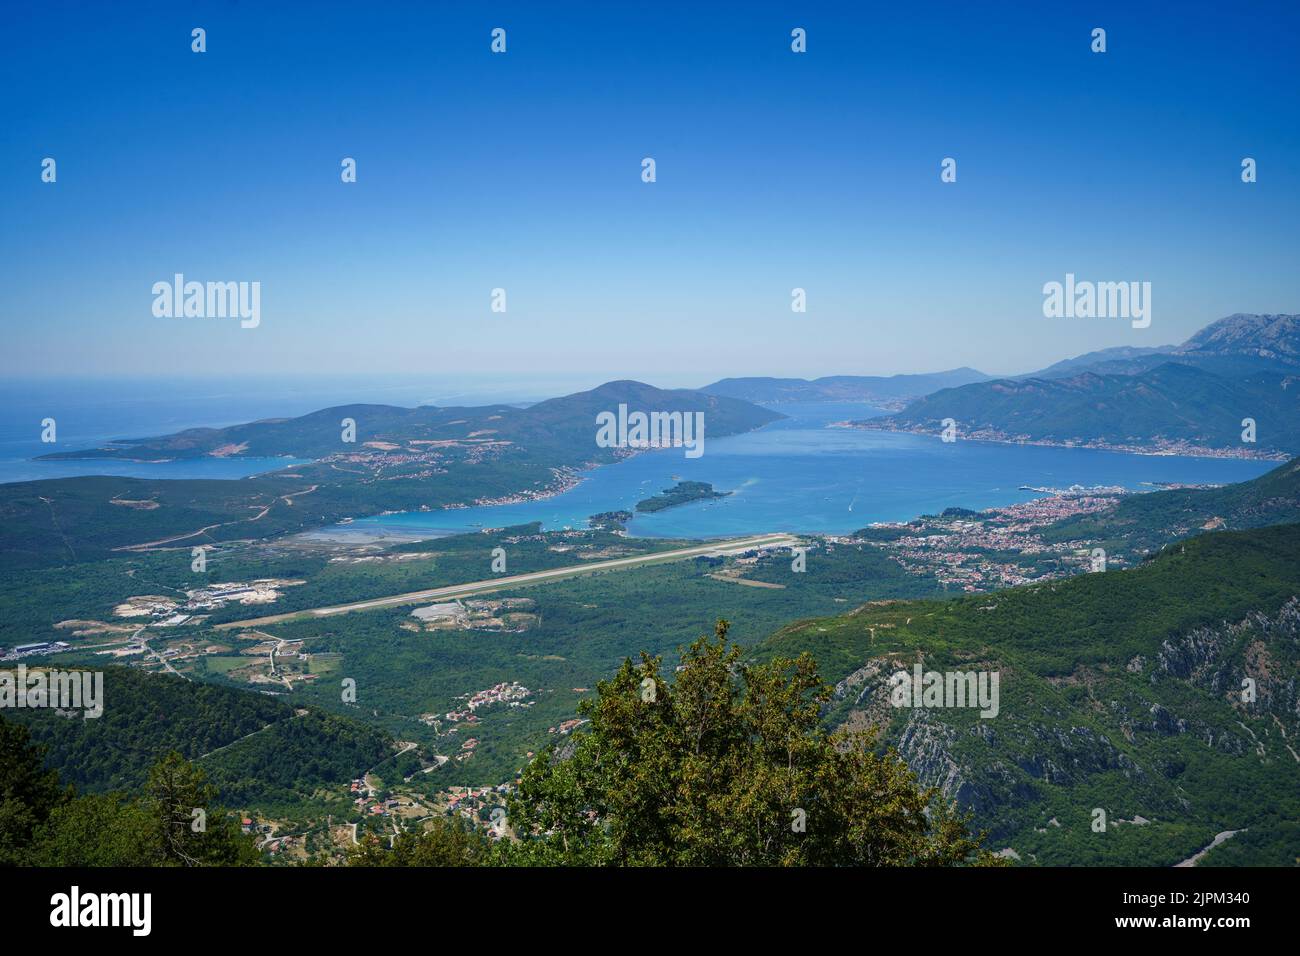 View over Tivat and Tivat Airport near Kotor, Montenegro from Serpentines on a clear, cloudless day near Trojica Observation Deck. Stock Photo